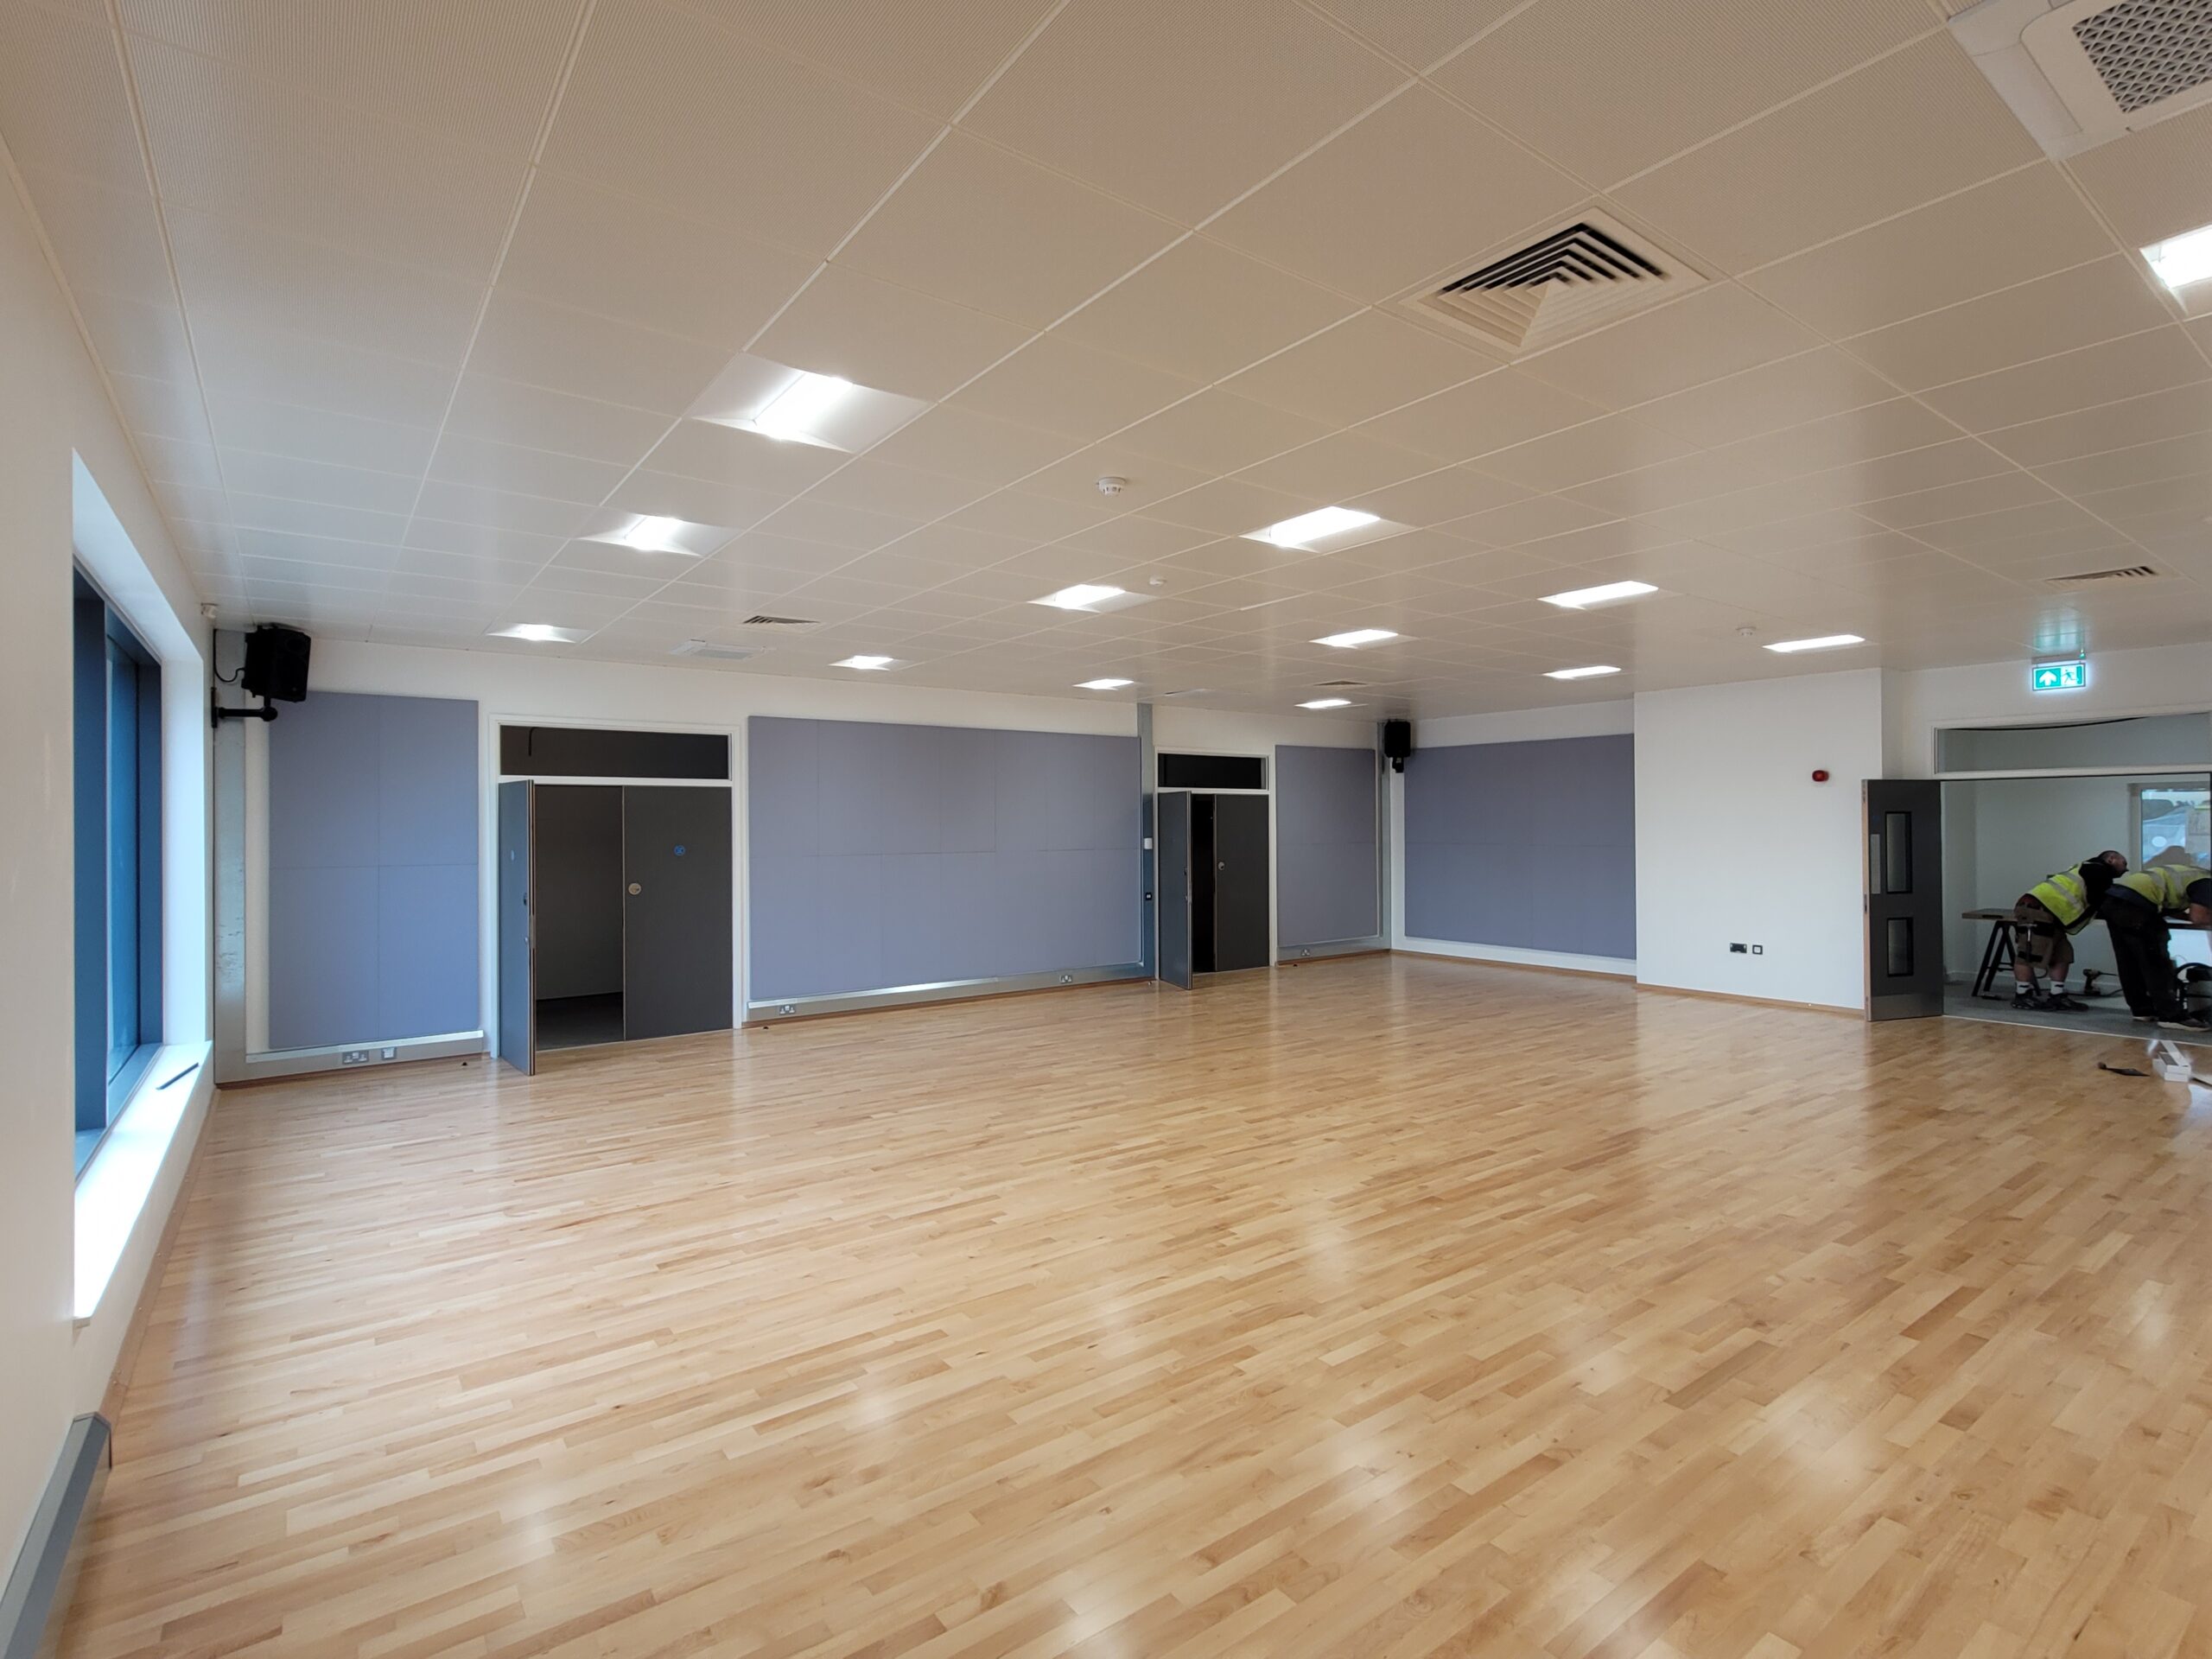 New acoustic walls fitted in a large hall.